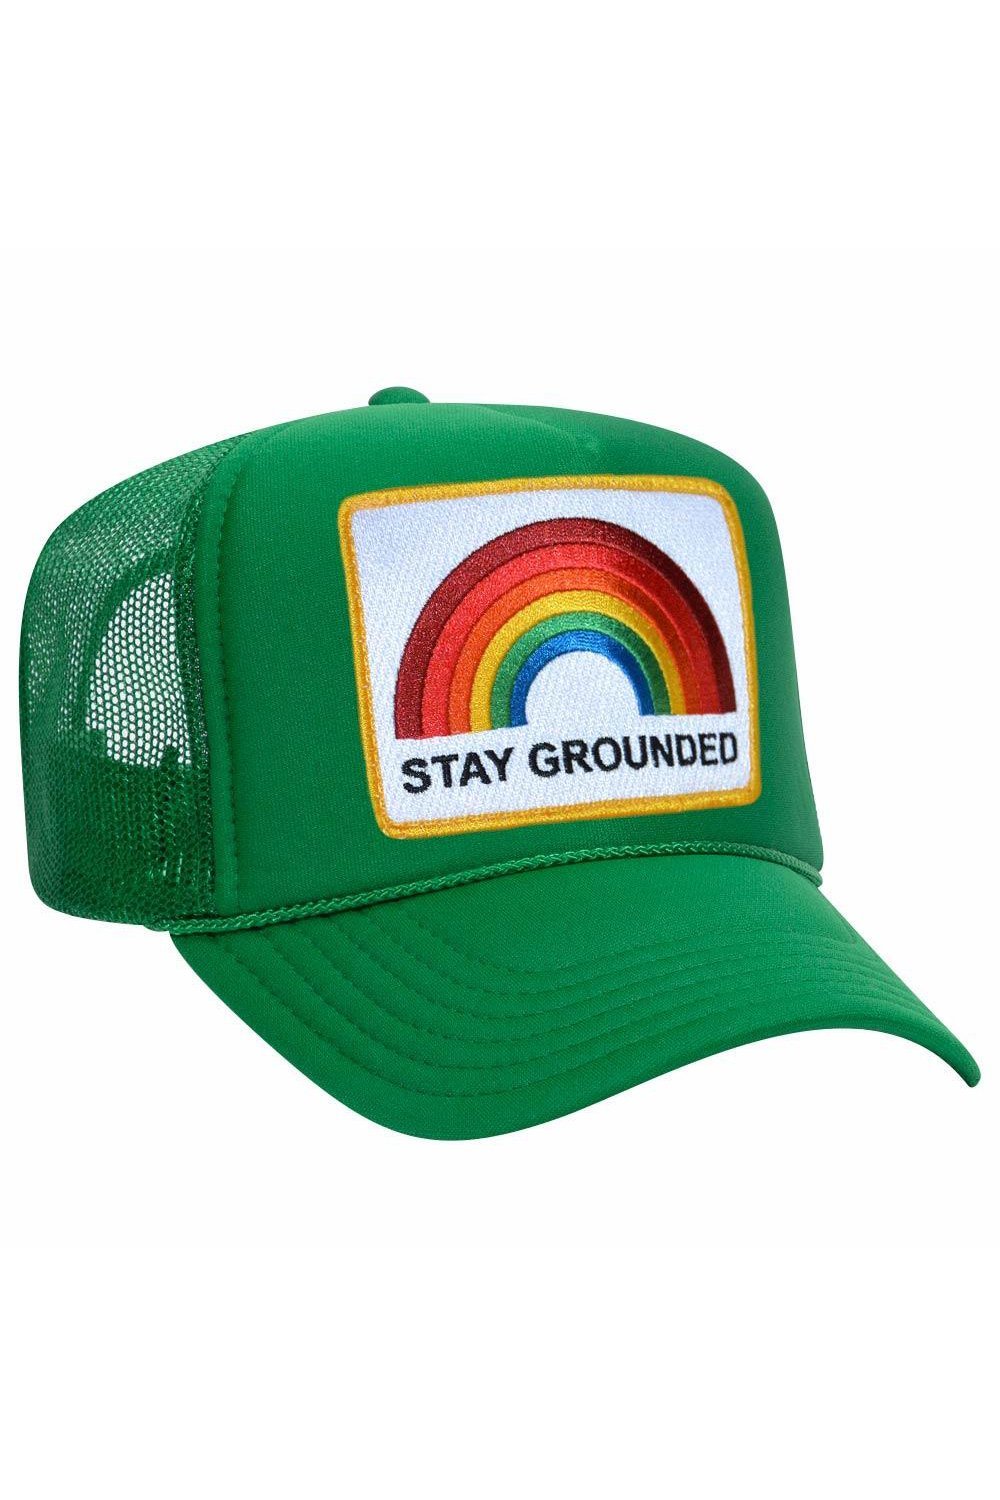 Stay Grounded Trucker Hat Neon Pink